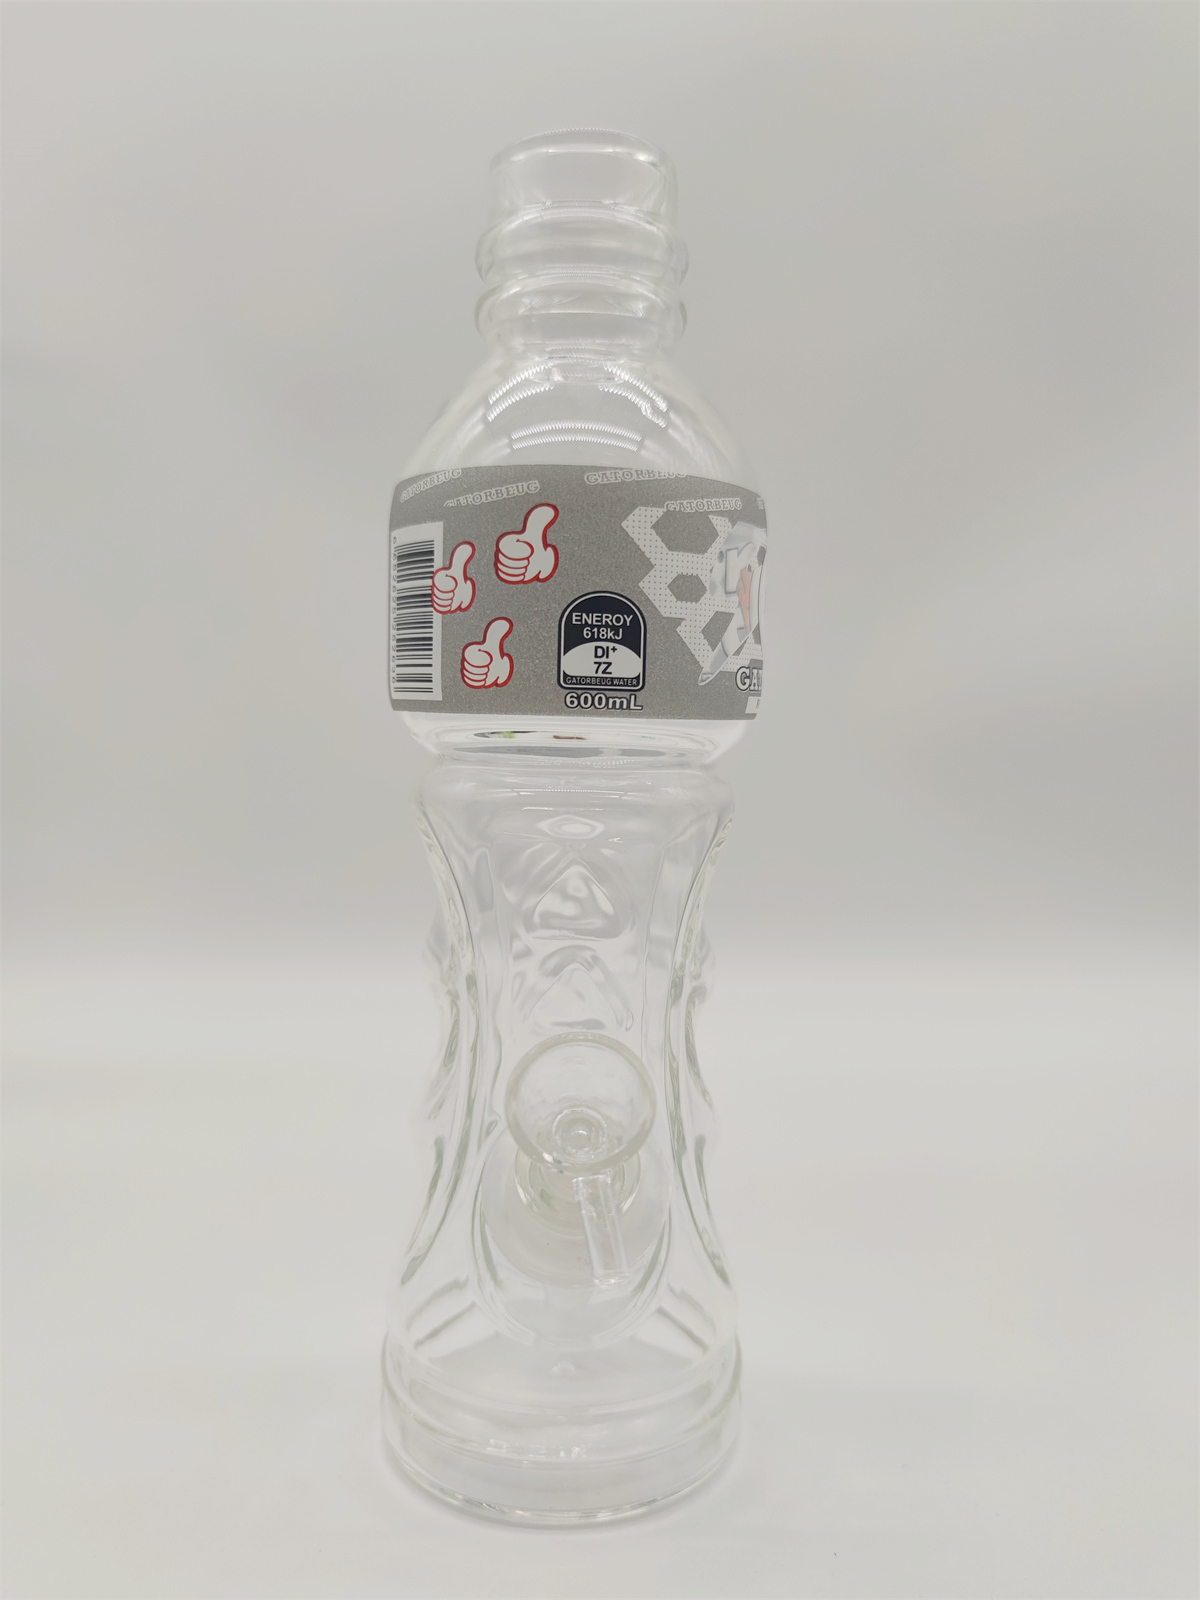 2021 Gatorbeug Heady Bong Clear 10 Inch Glass Bongs Water Pipe Gatorade Drinking Bottle Bong Tobacco Smoking Tube 10MM Bowl Heady Rig Recycler Bubbler Pipes